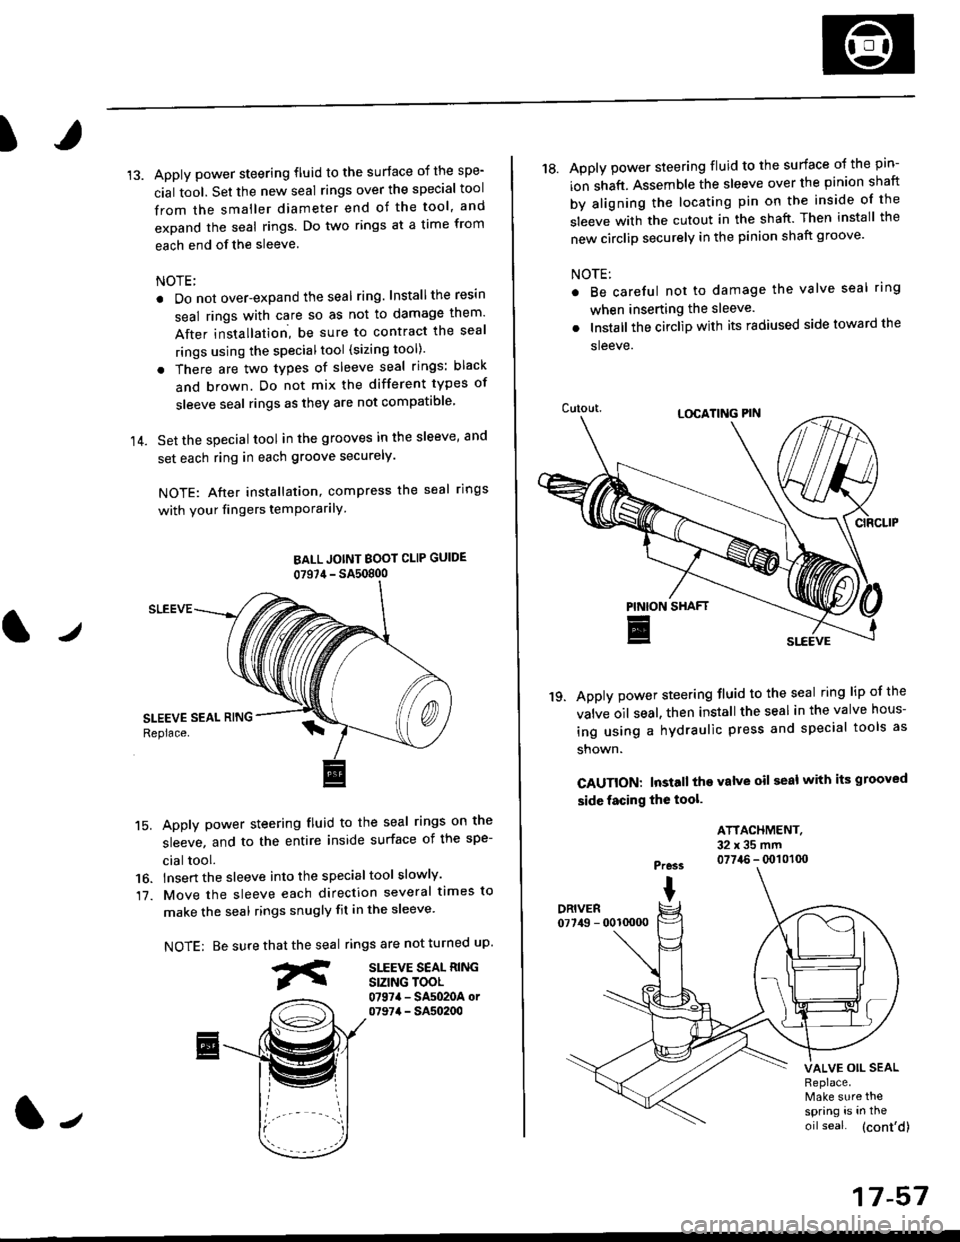 HONDA CIVIC 1996 6.G User Guide I
14.
Apply power steering fluid to the surface of the spe-
cial tool. Set the new seal rings over the special tool
from the smaller diameter end of the tool, and
expand the seal rings. Do two rings a